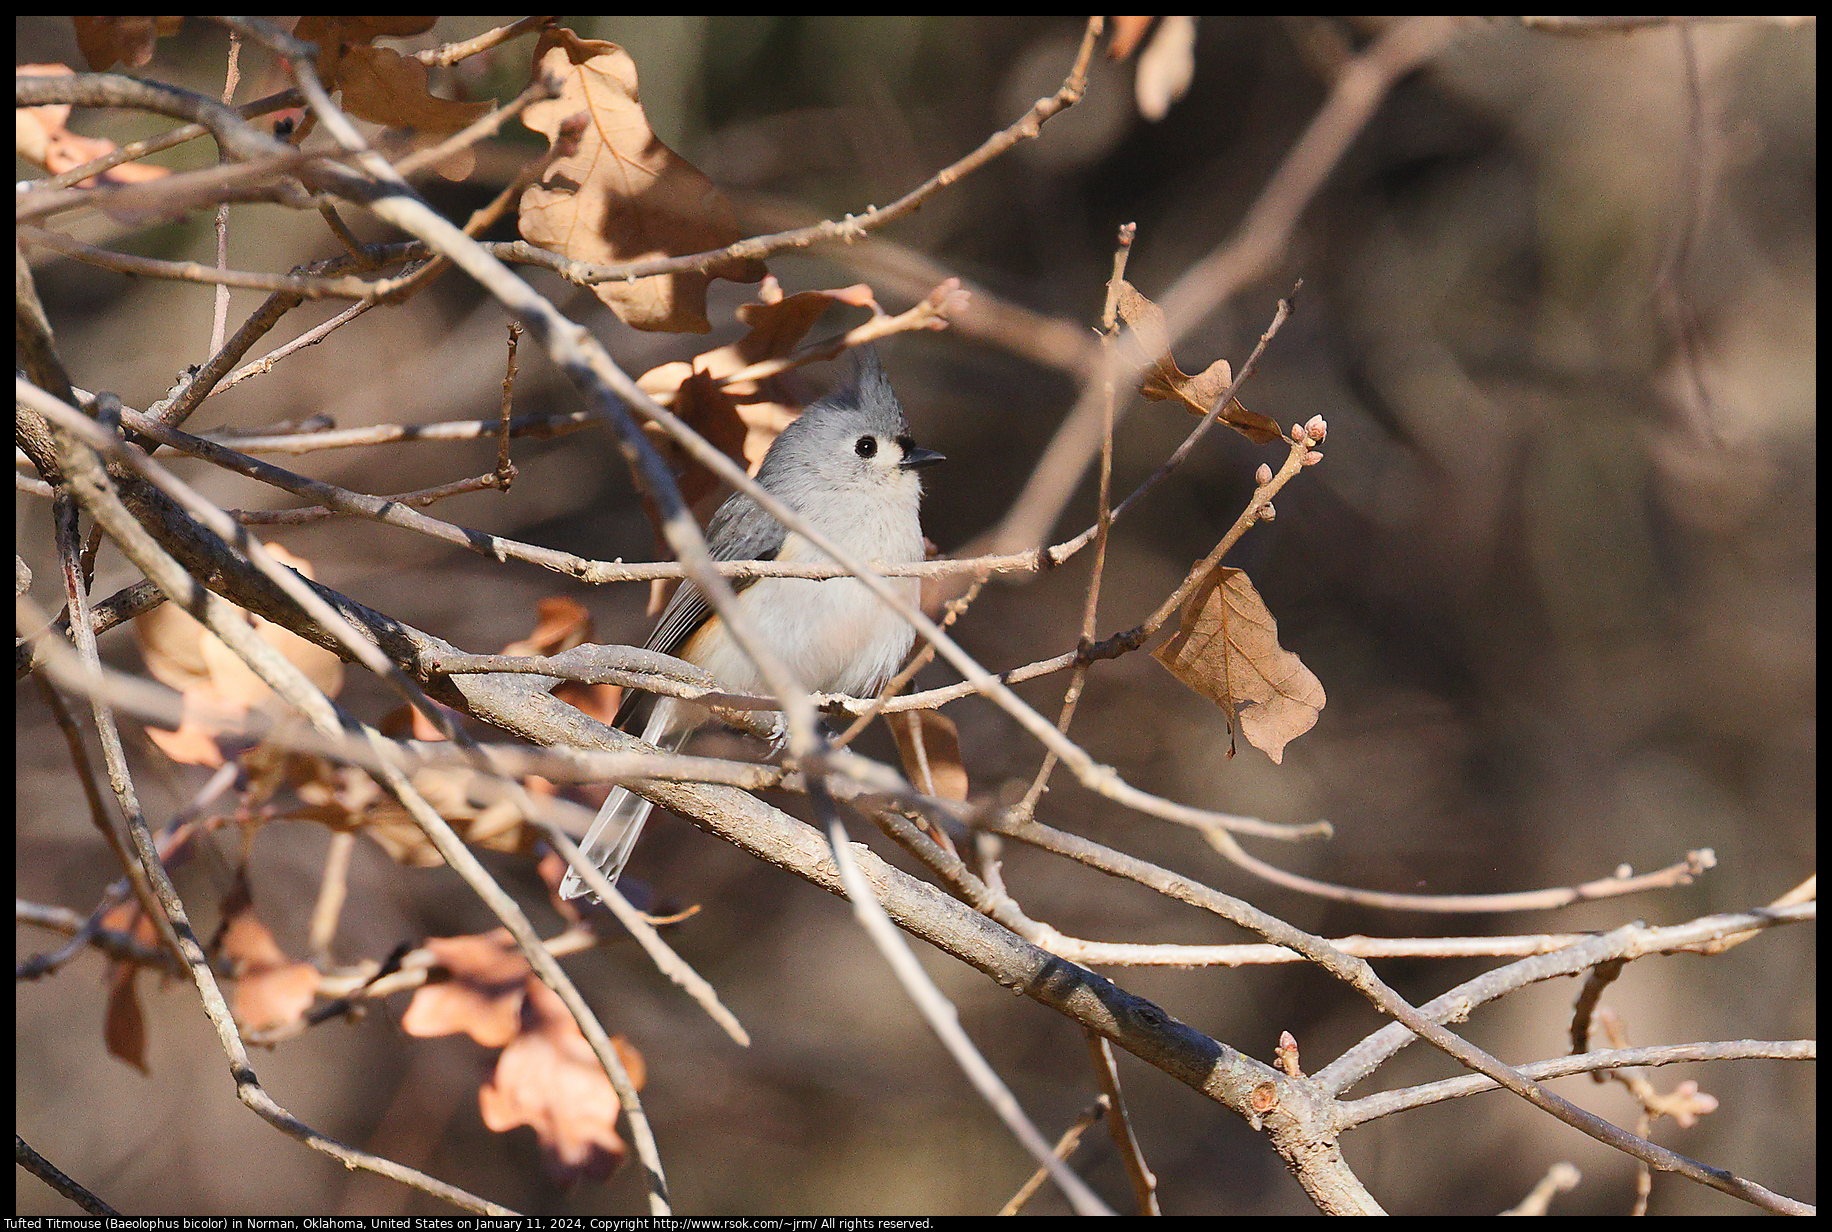 Tufted Titmouse (Baeolophus bicolor) in Norman, Oklahoma, United States on January 11, 2024